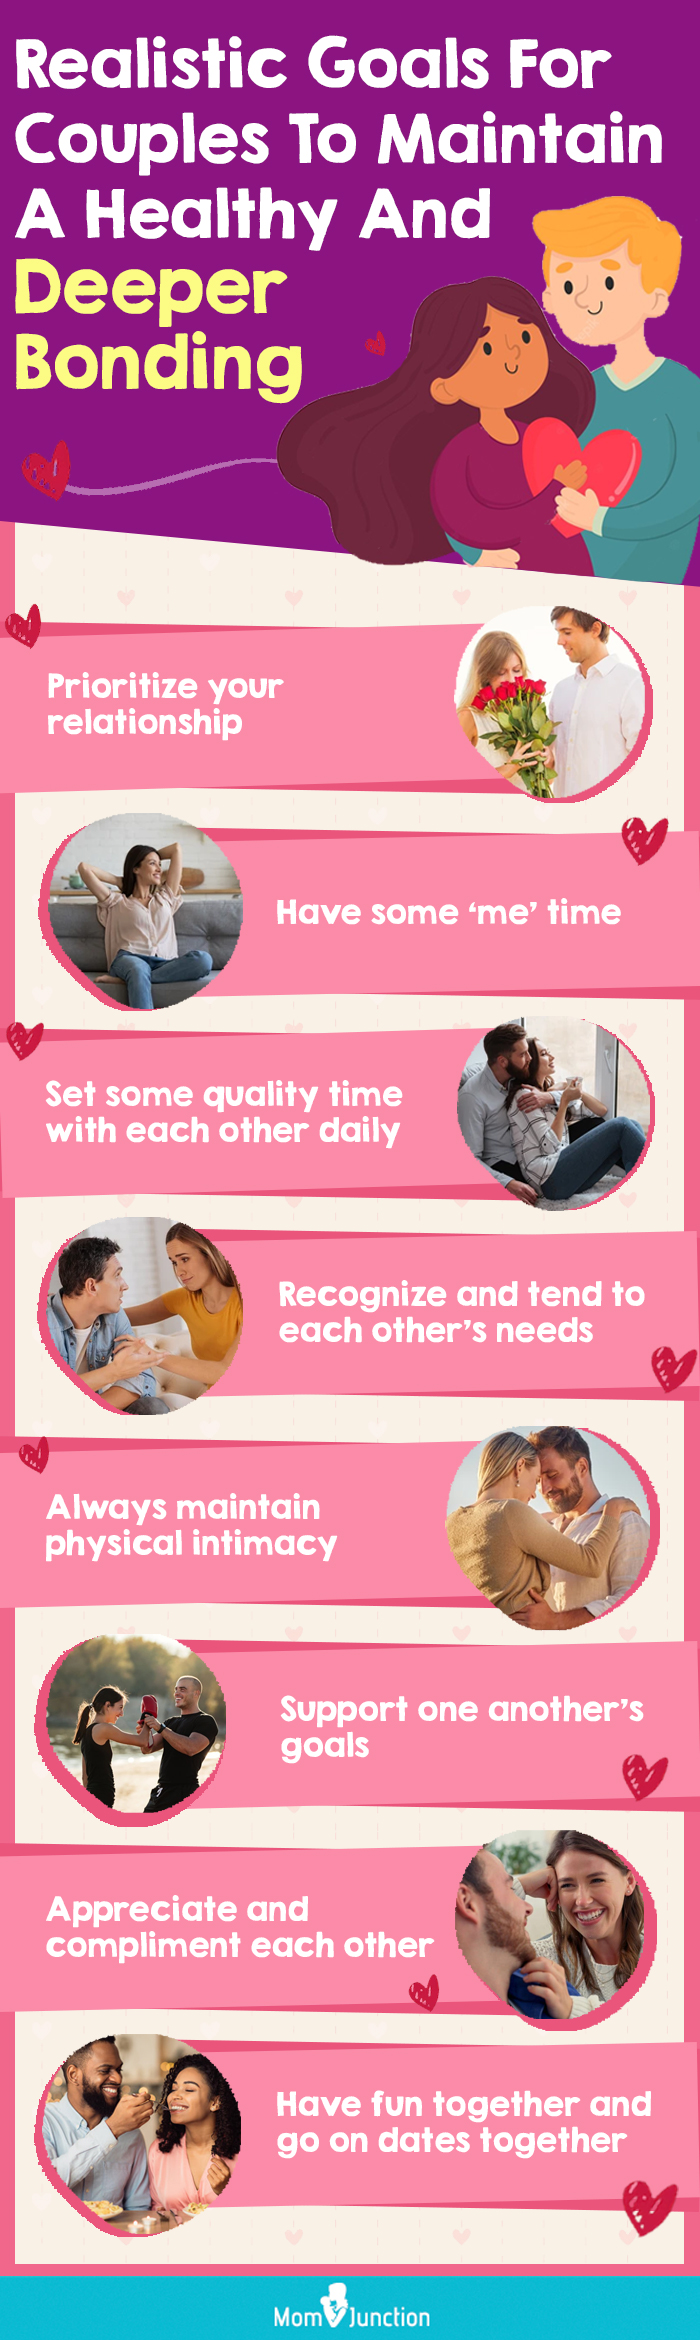 realistic goals for couples to maintain a healthy and deeper bonding (infographic)